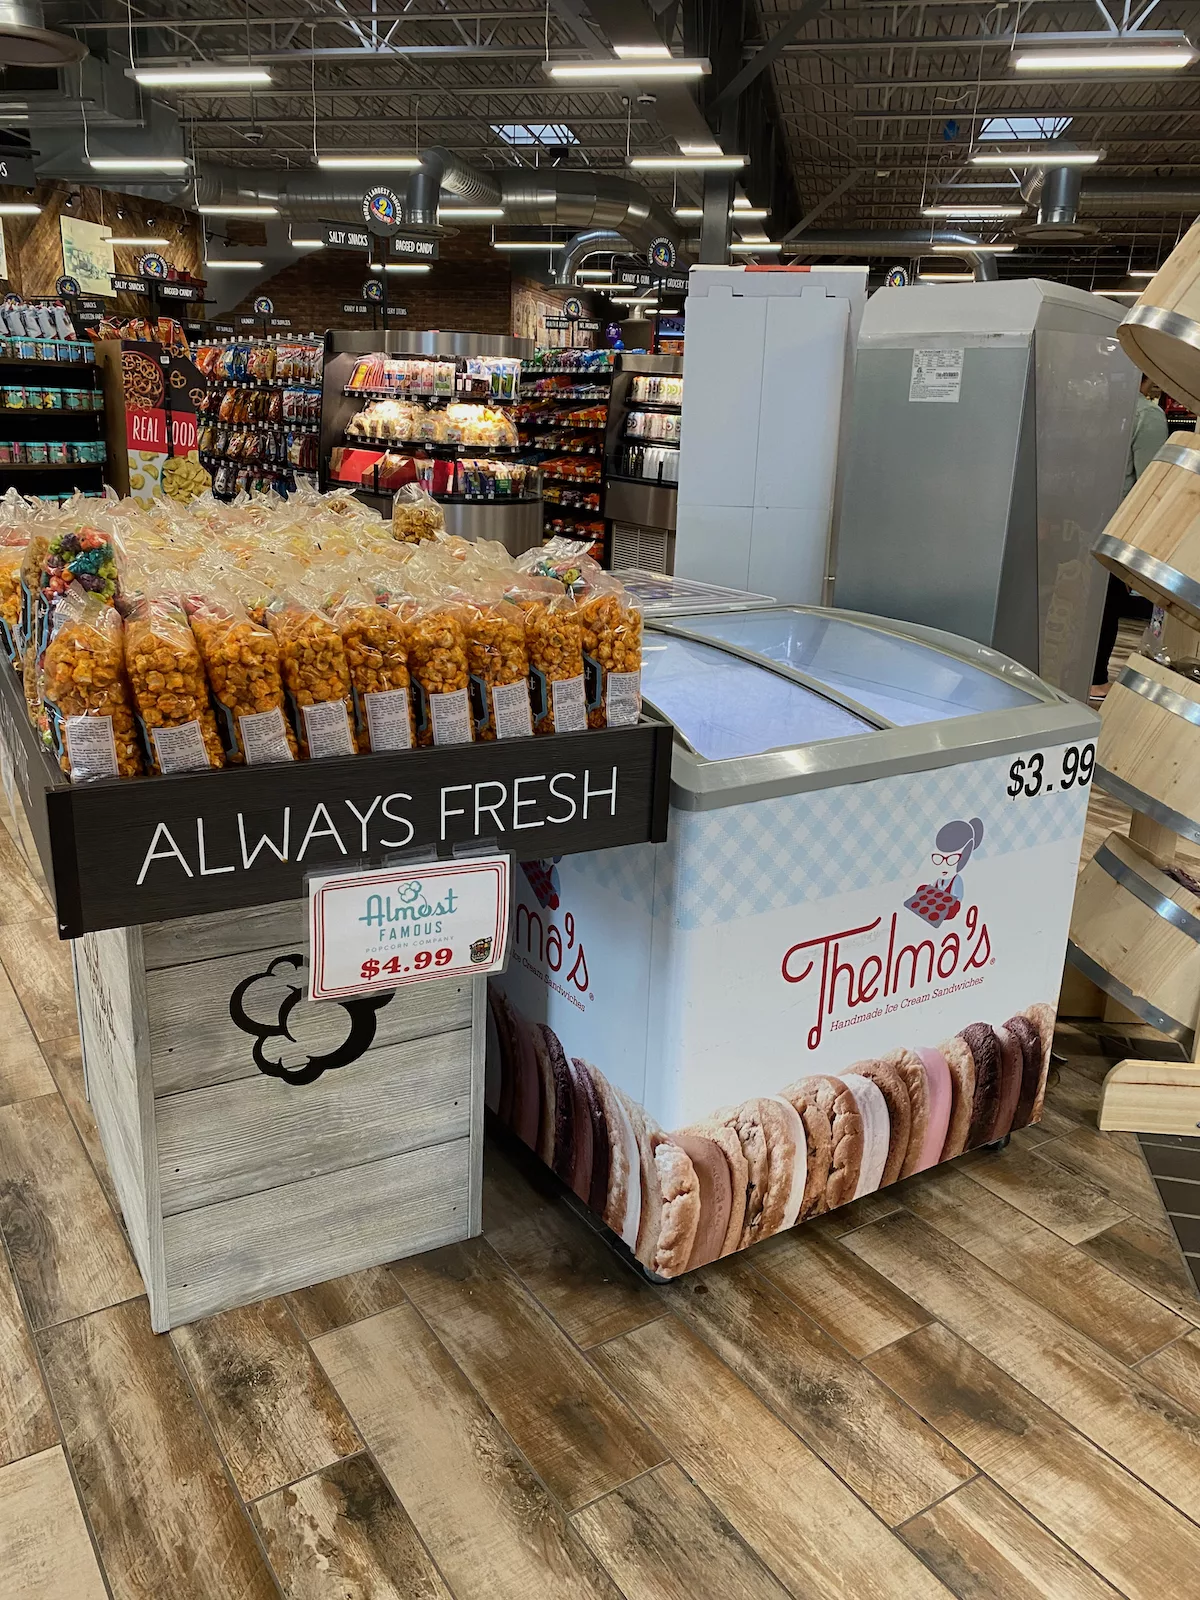 Thelma's ice cream sandwiches and Almost Famous popcorn at the convenience store at the World's Largest Truckstop in Walcott, Iowa